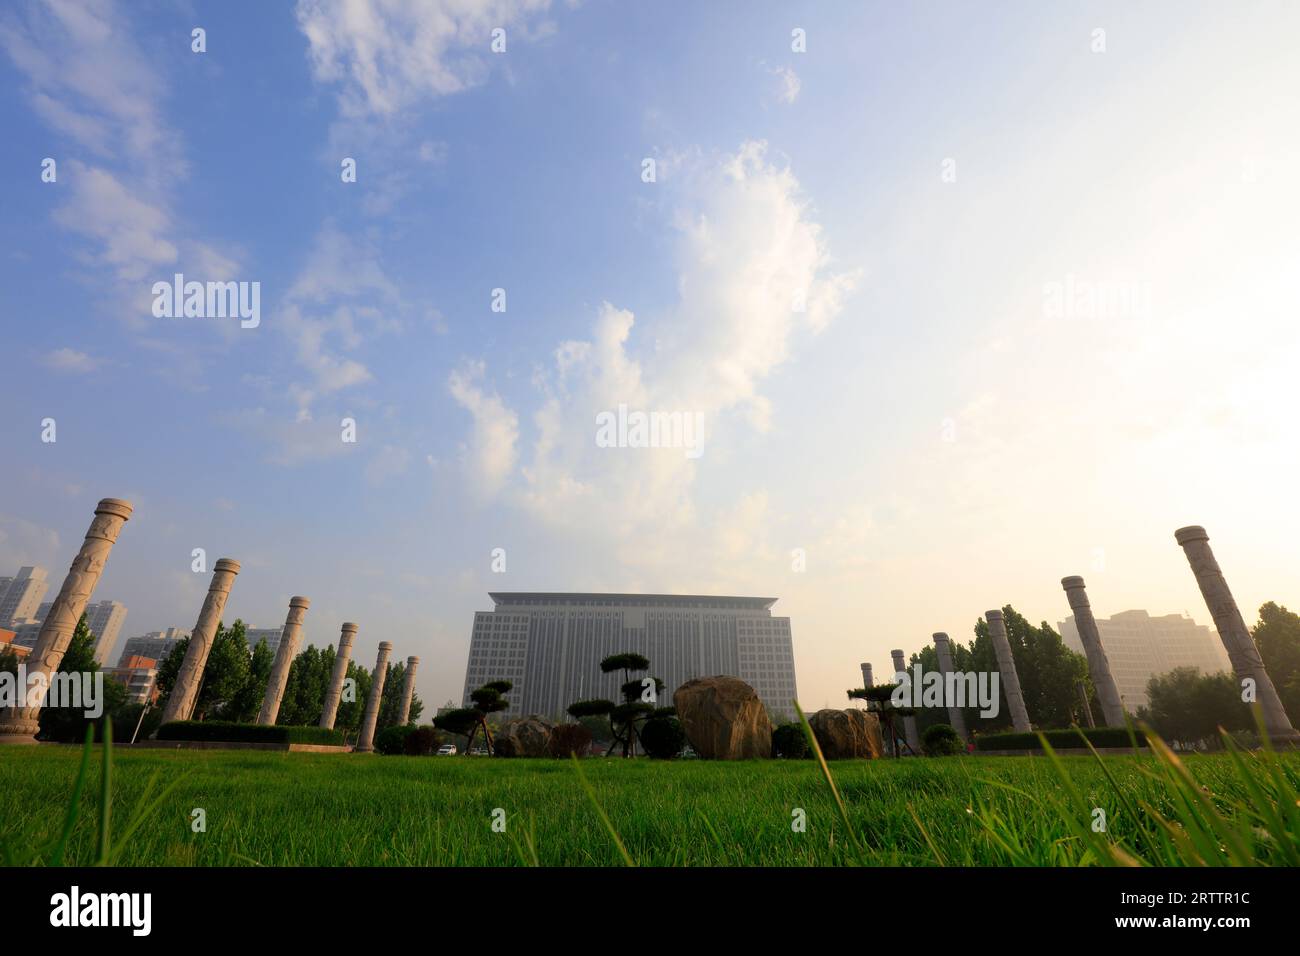 Luannan County - June 21, 2018: Architectural Scenery of Huimin Square, Luannan County, Hebei Province, China Stock Photo